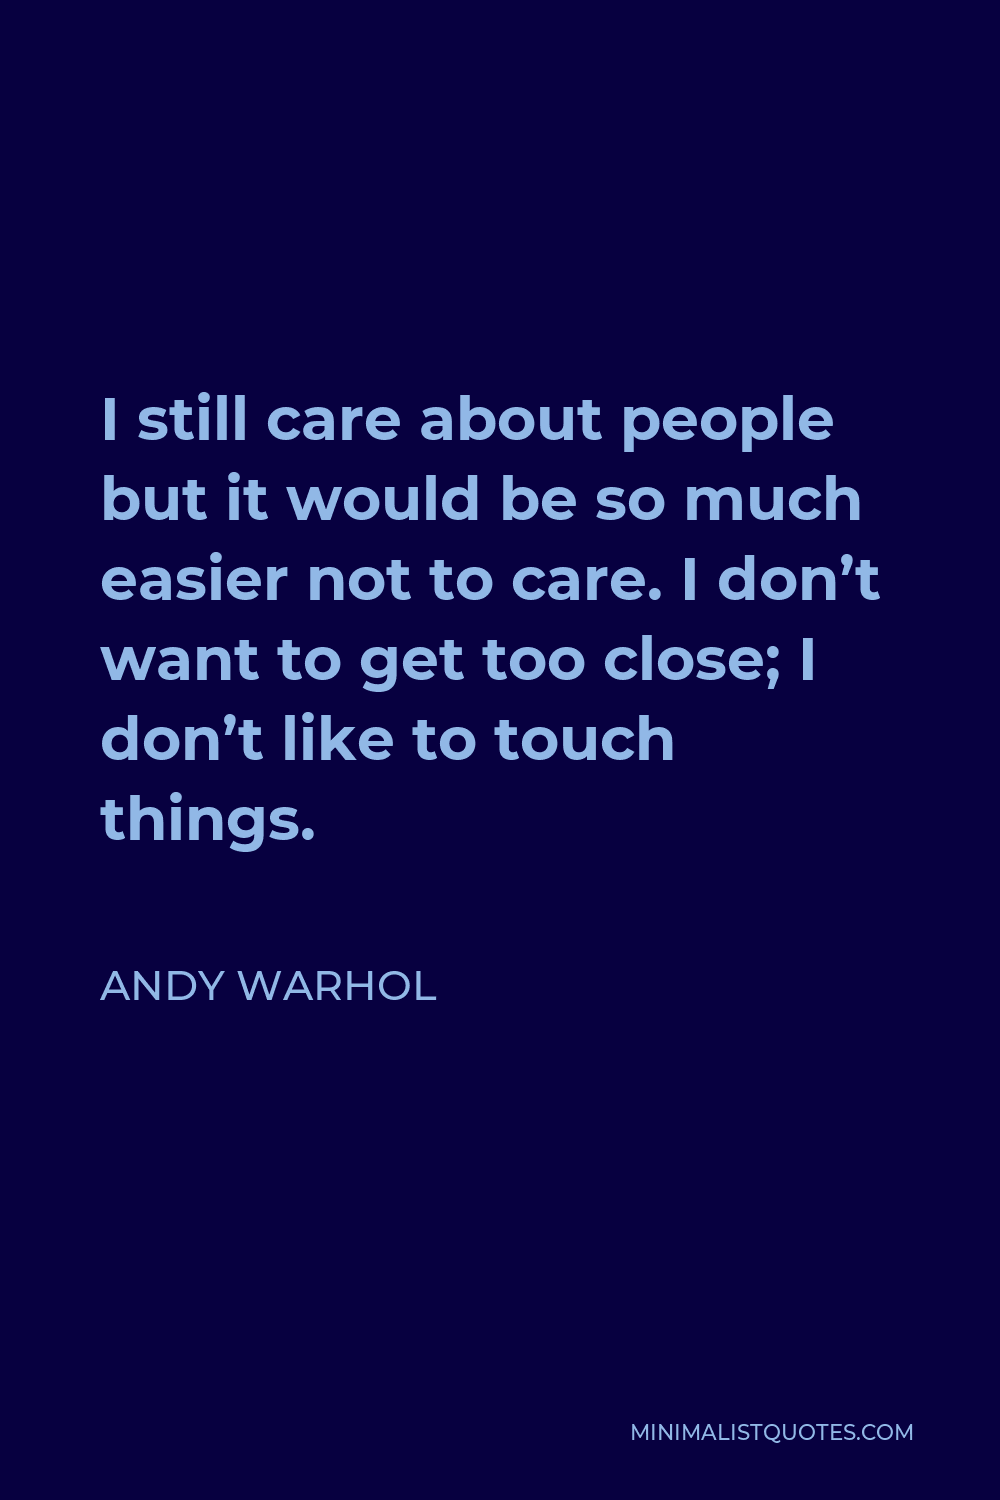 Andy Warhol Quote - I still care about people but it would be so much easier not to care. I don’t want to get too close; I don’t like to touch things.